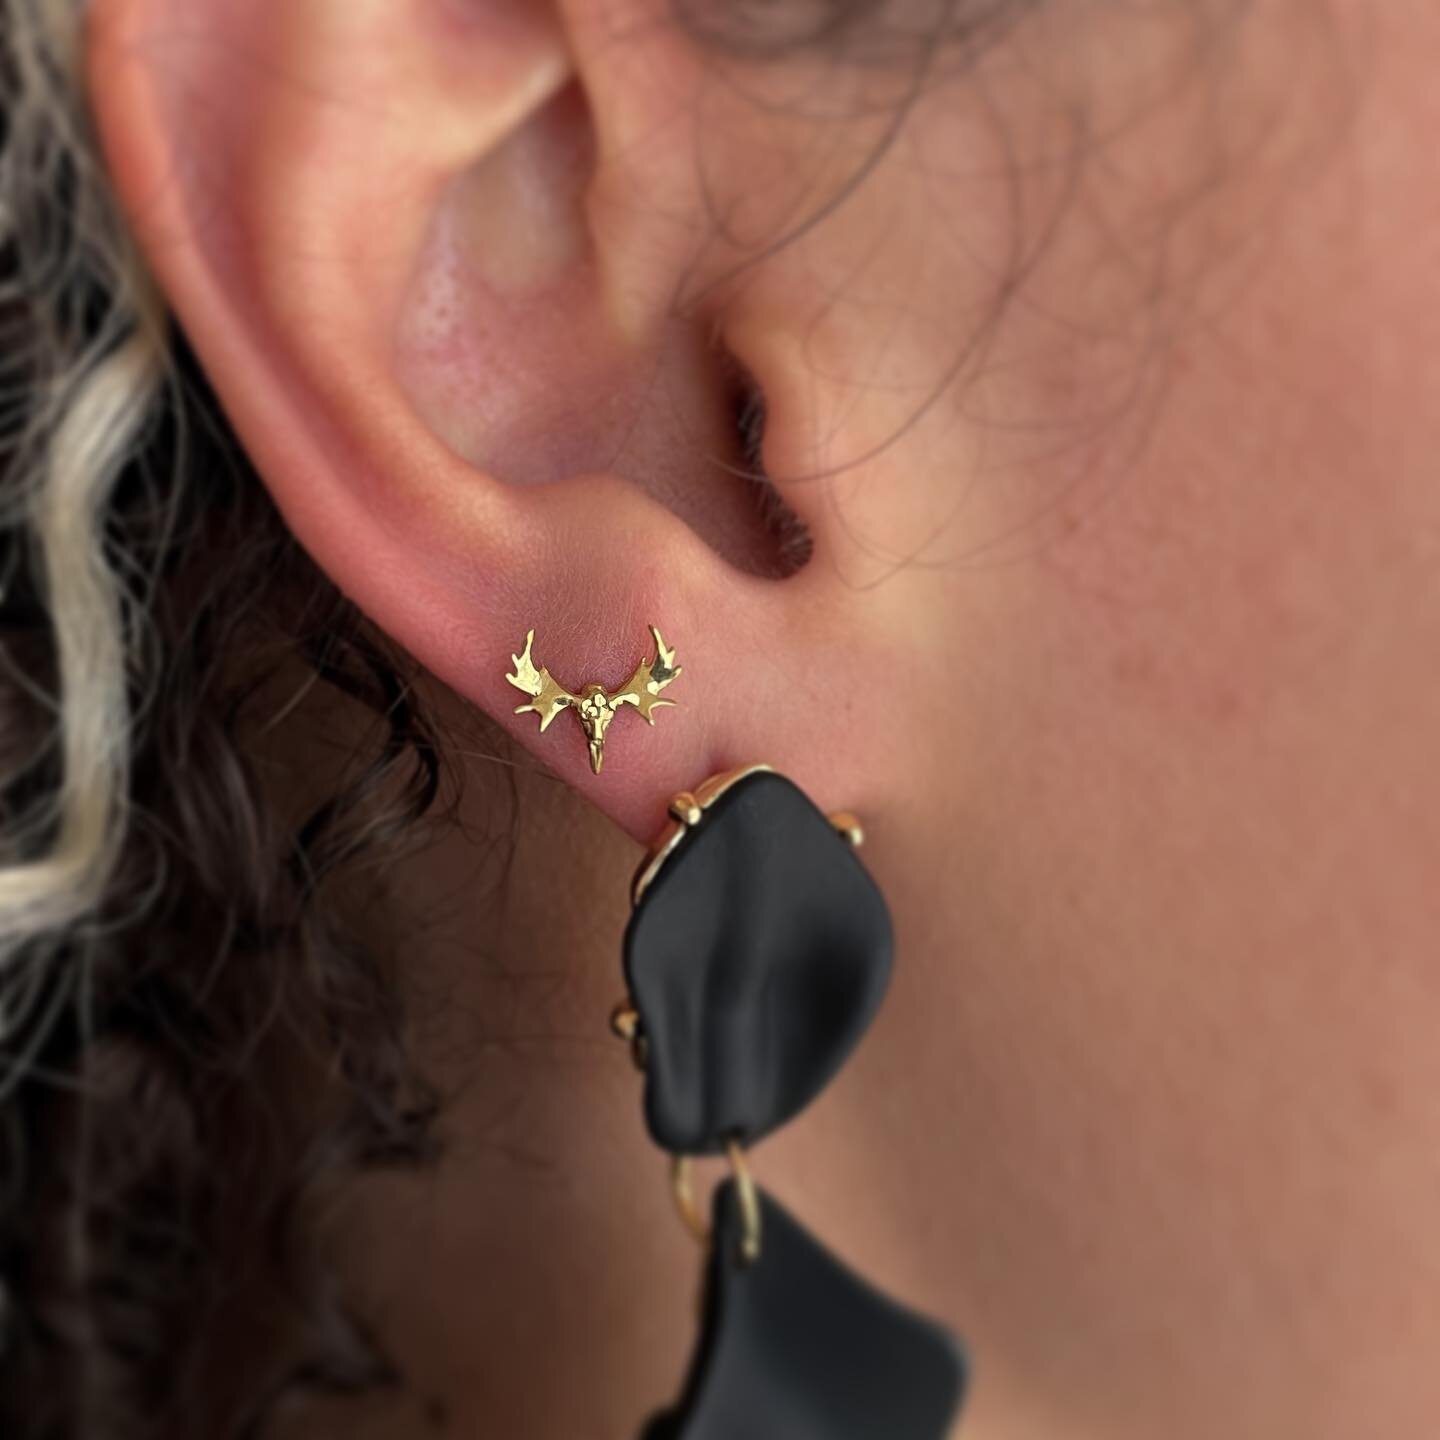 ✨not pierced by me✨ got the opportunity to upgrade some lobes today for her Beyonc&eacute; concert ✨18kt yellow gold Moose Skull from @anatometalinc ✨